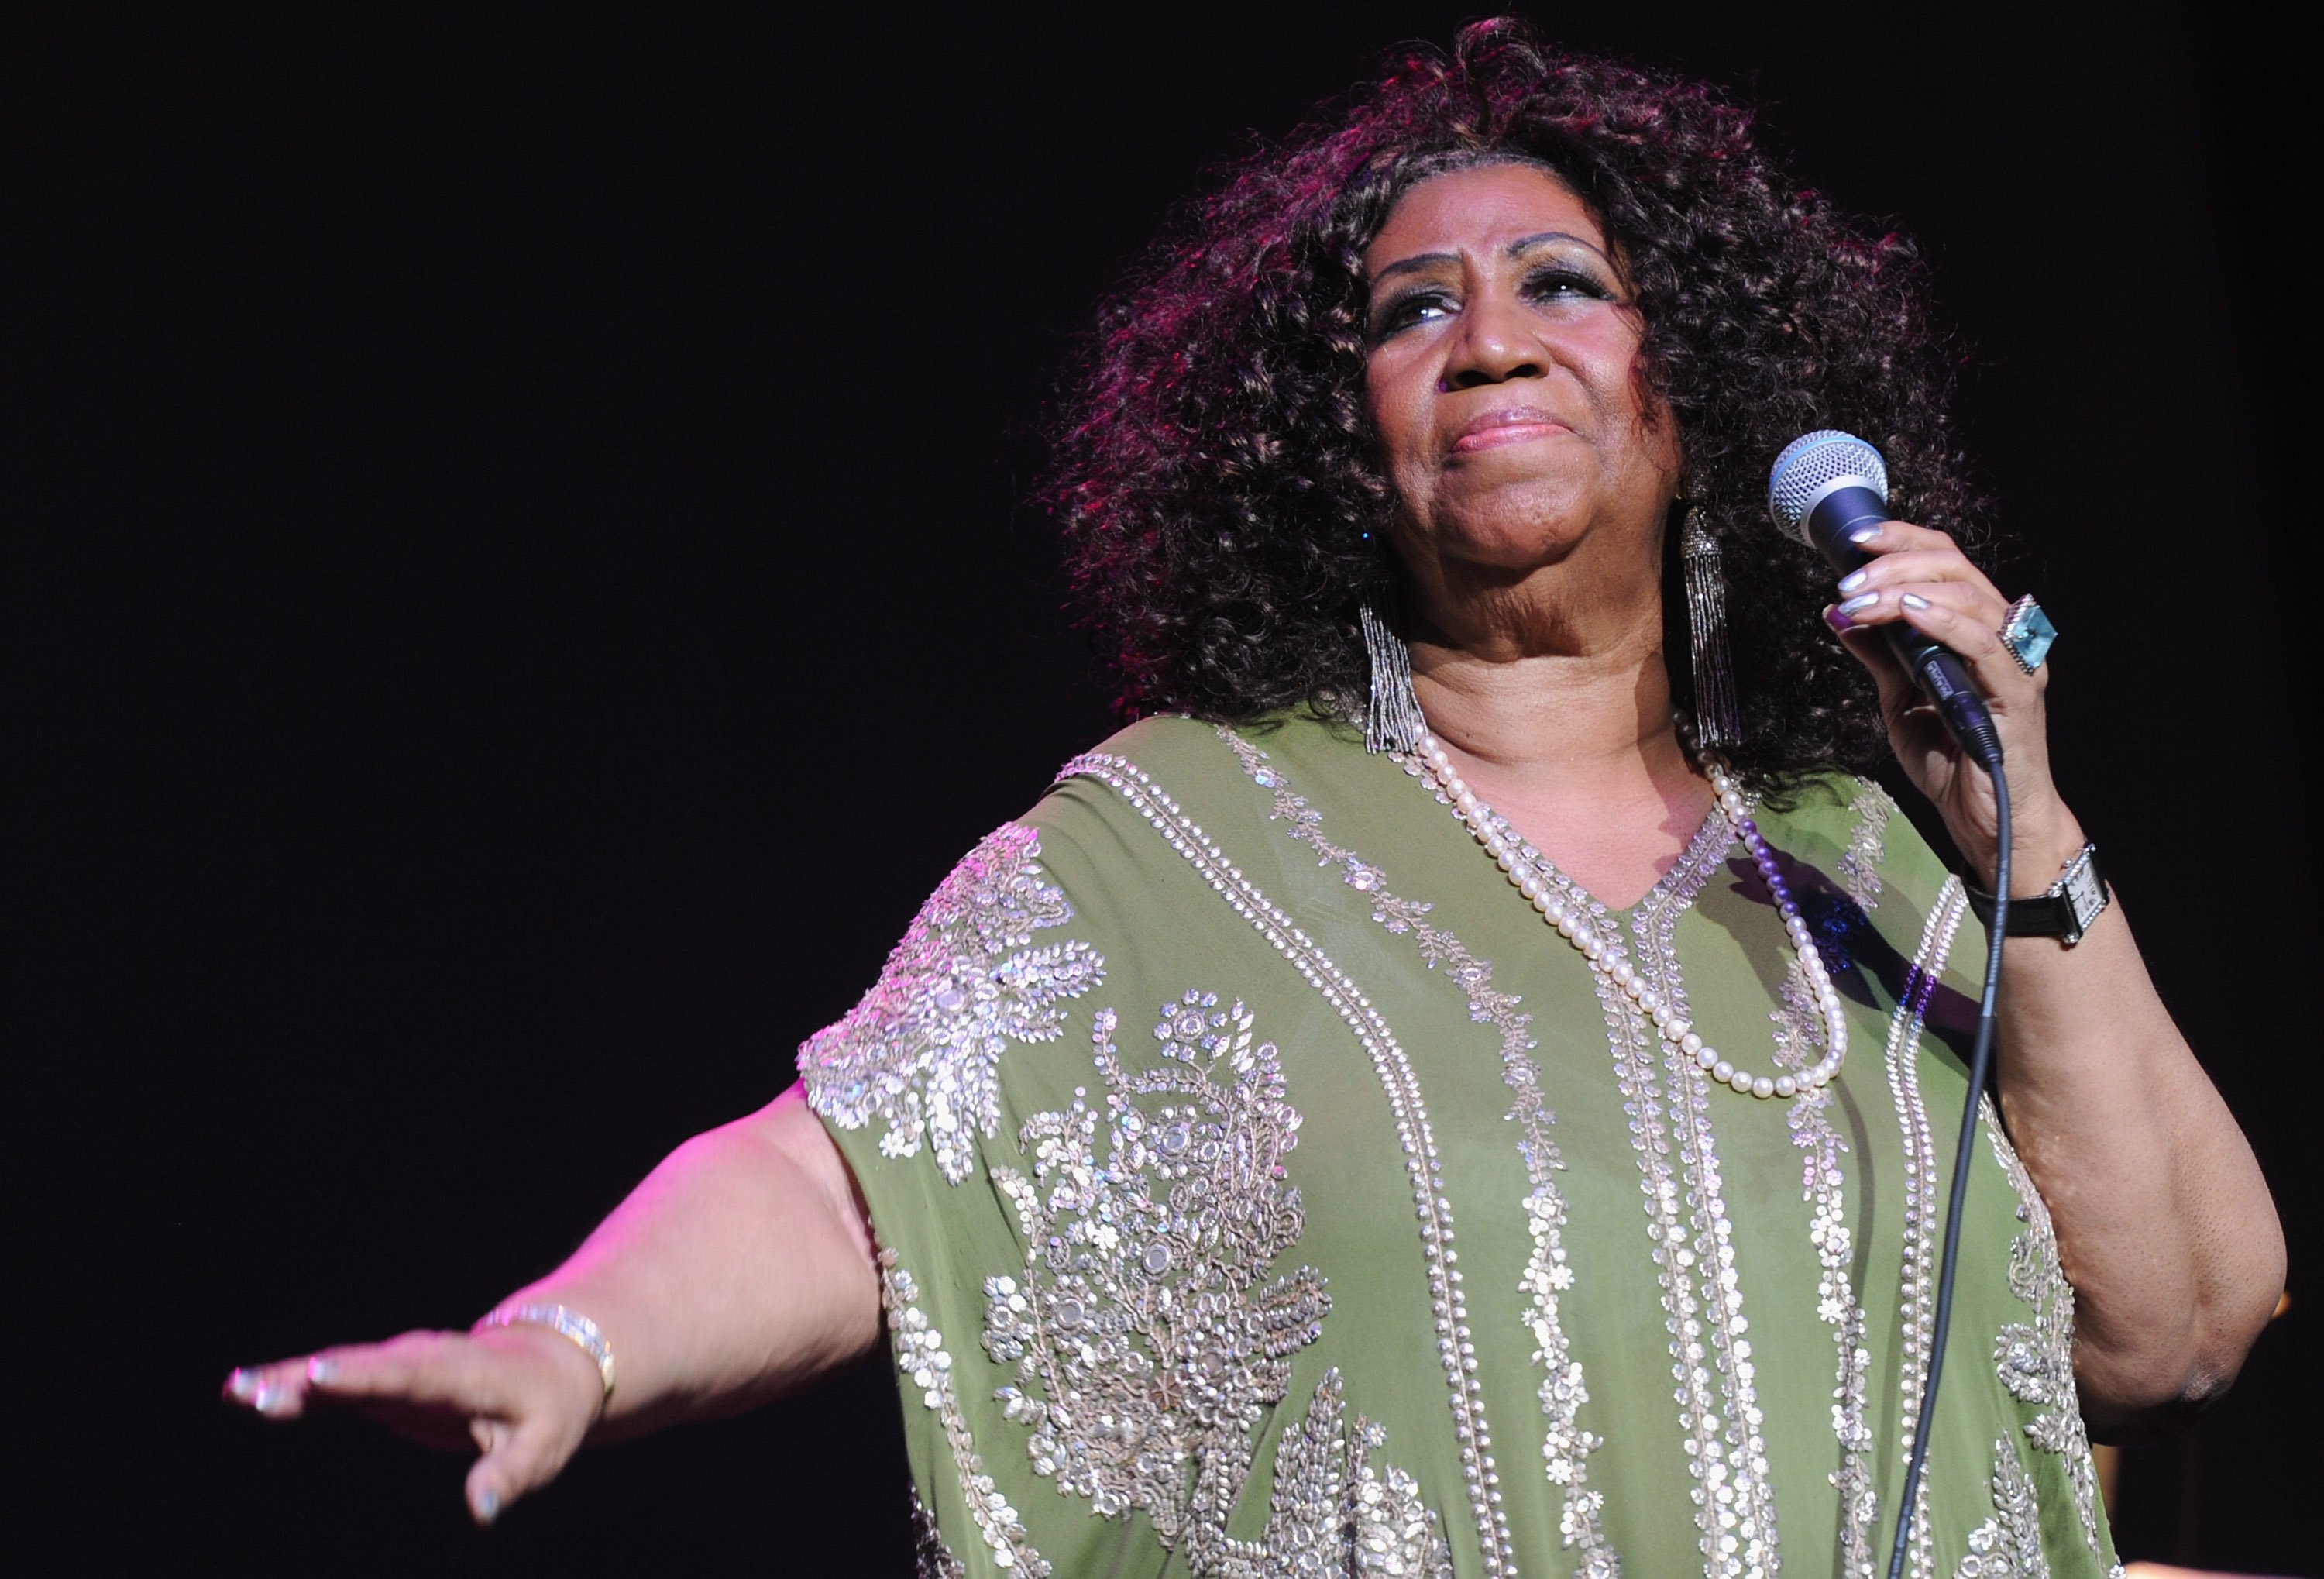 Aretha Franklin performs at The Fox Theatre on March 5, 2012 in Atlanta, Georgia | Photo: Getty Images